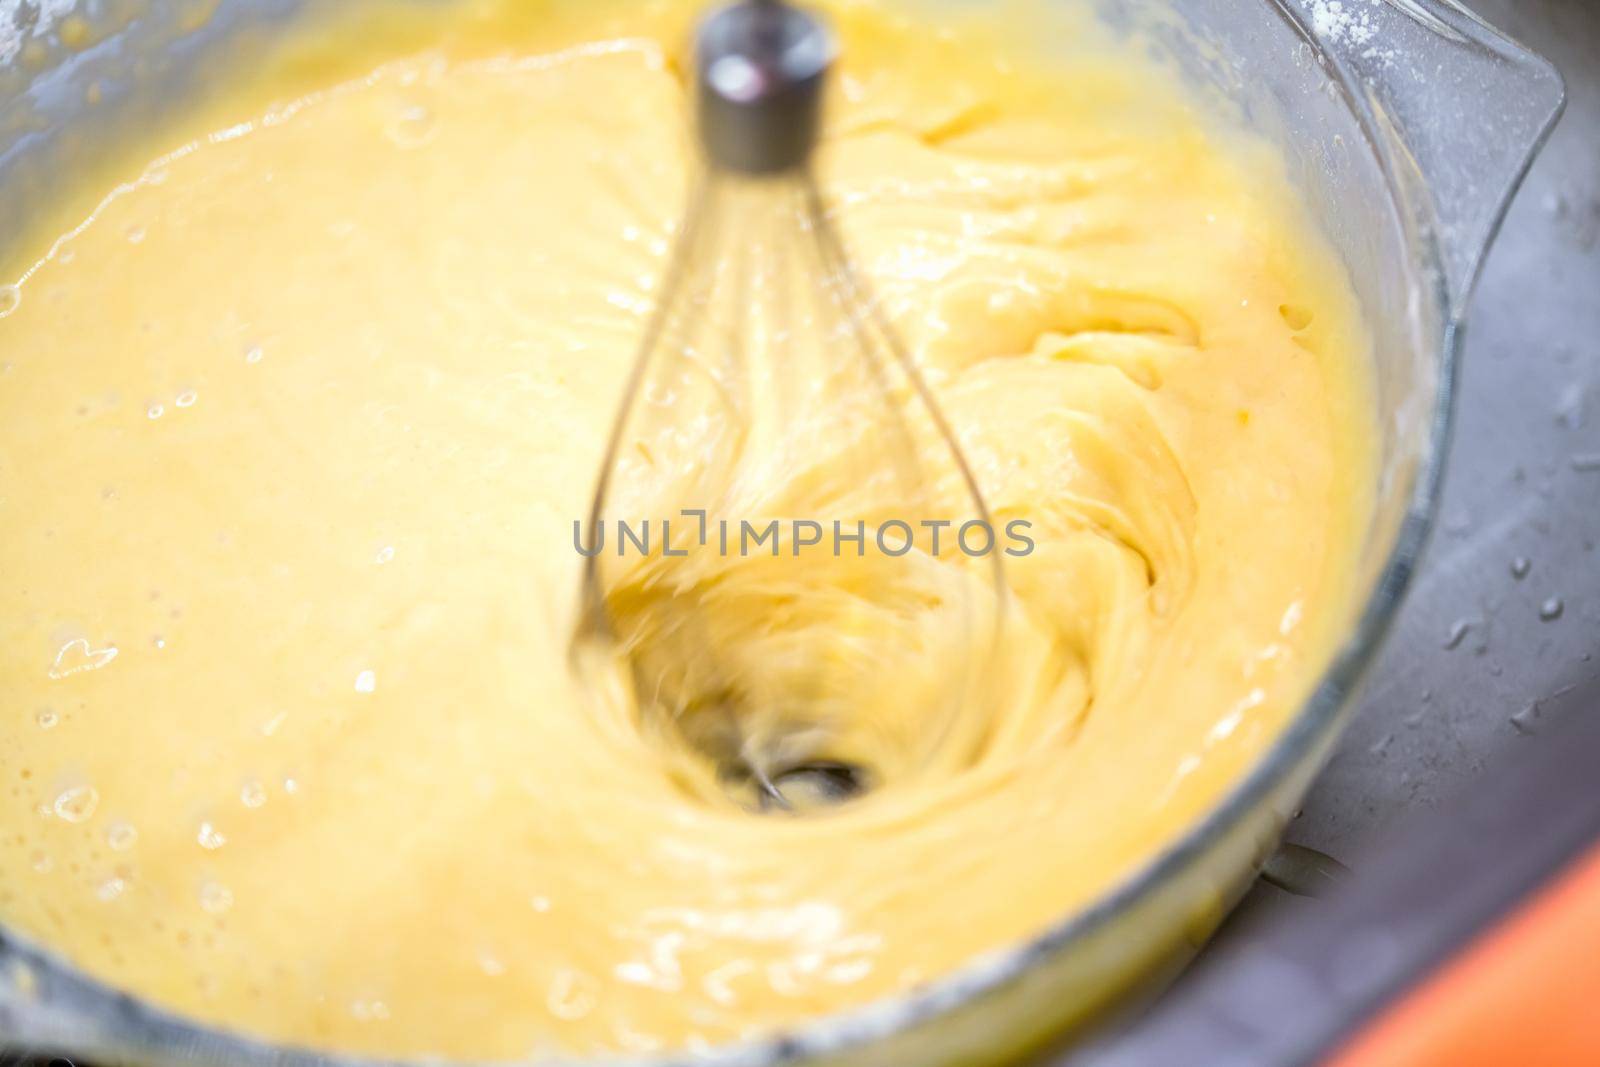 mixing homemade cake by Sonat